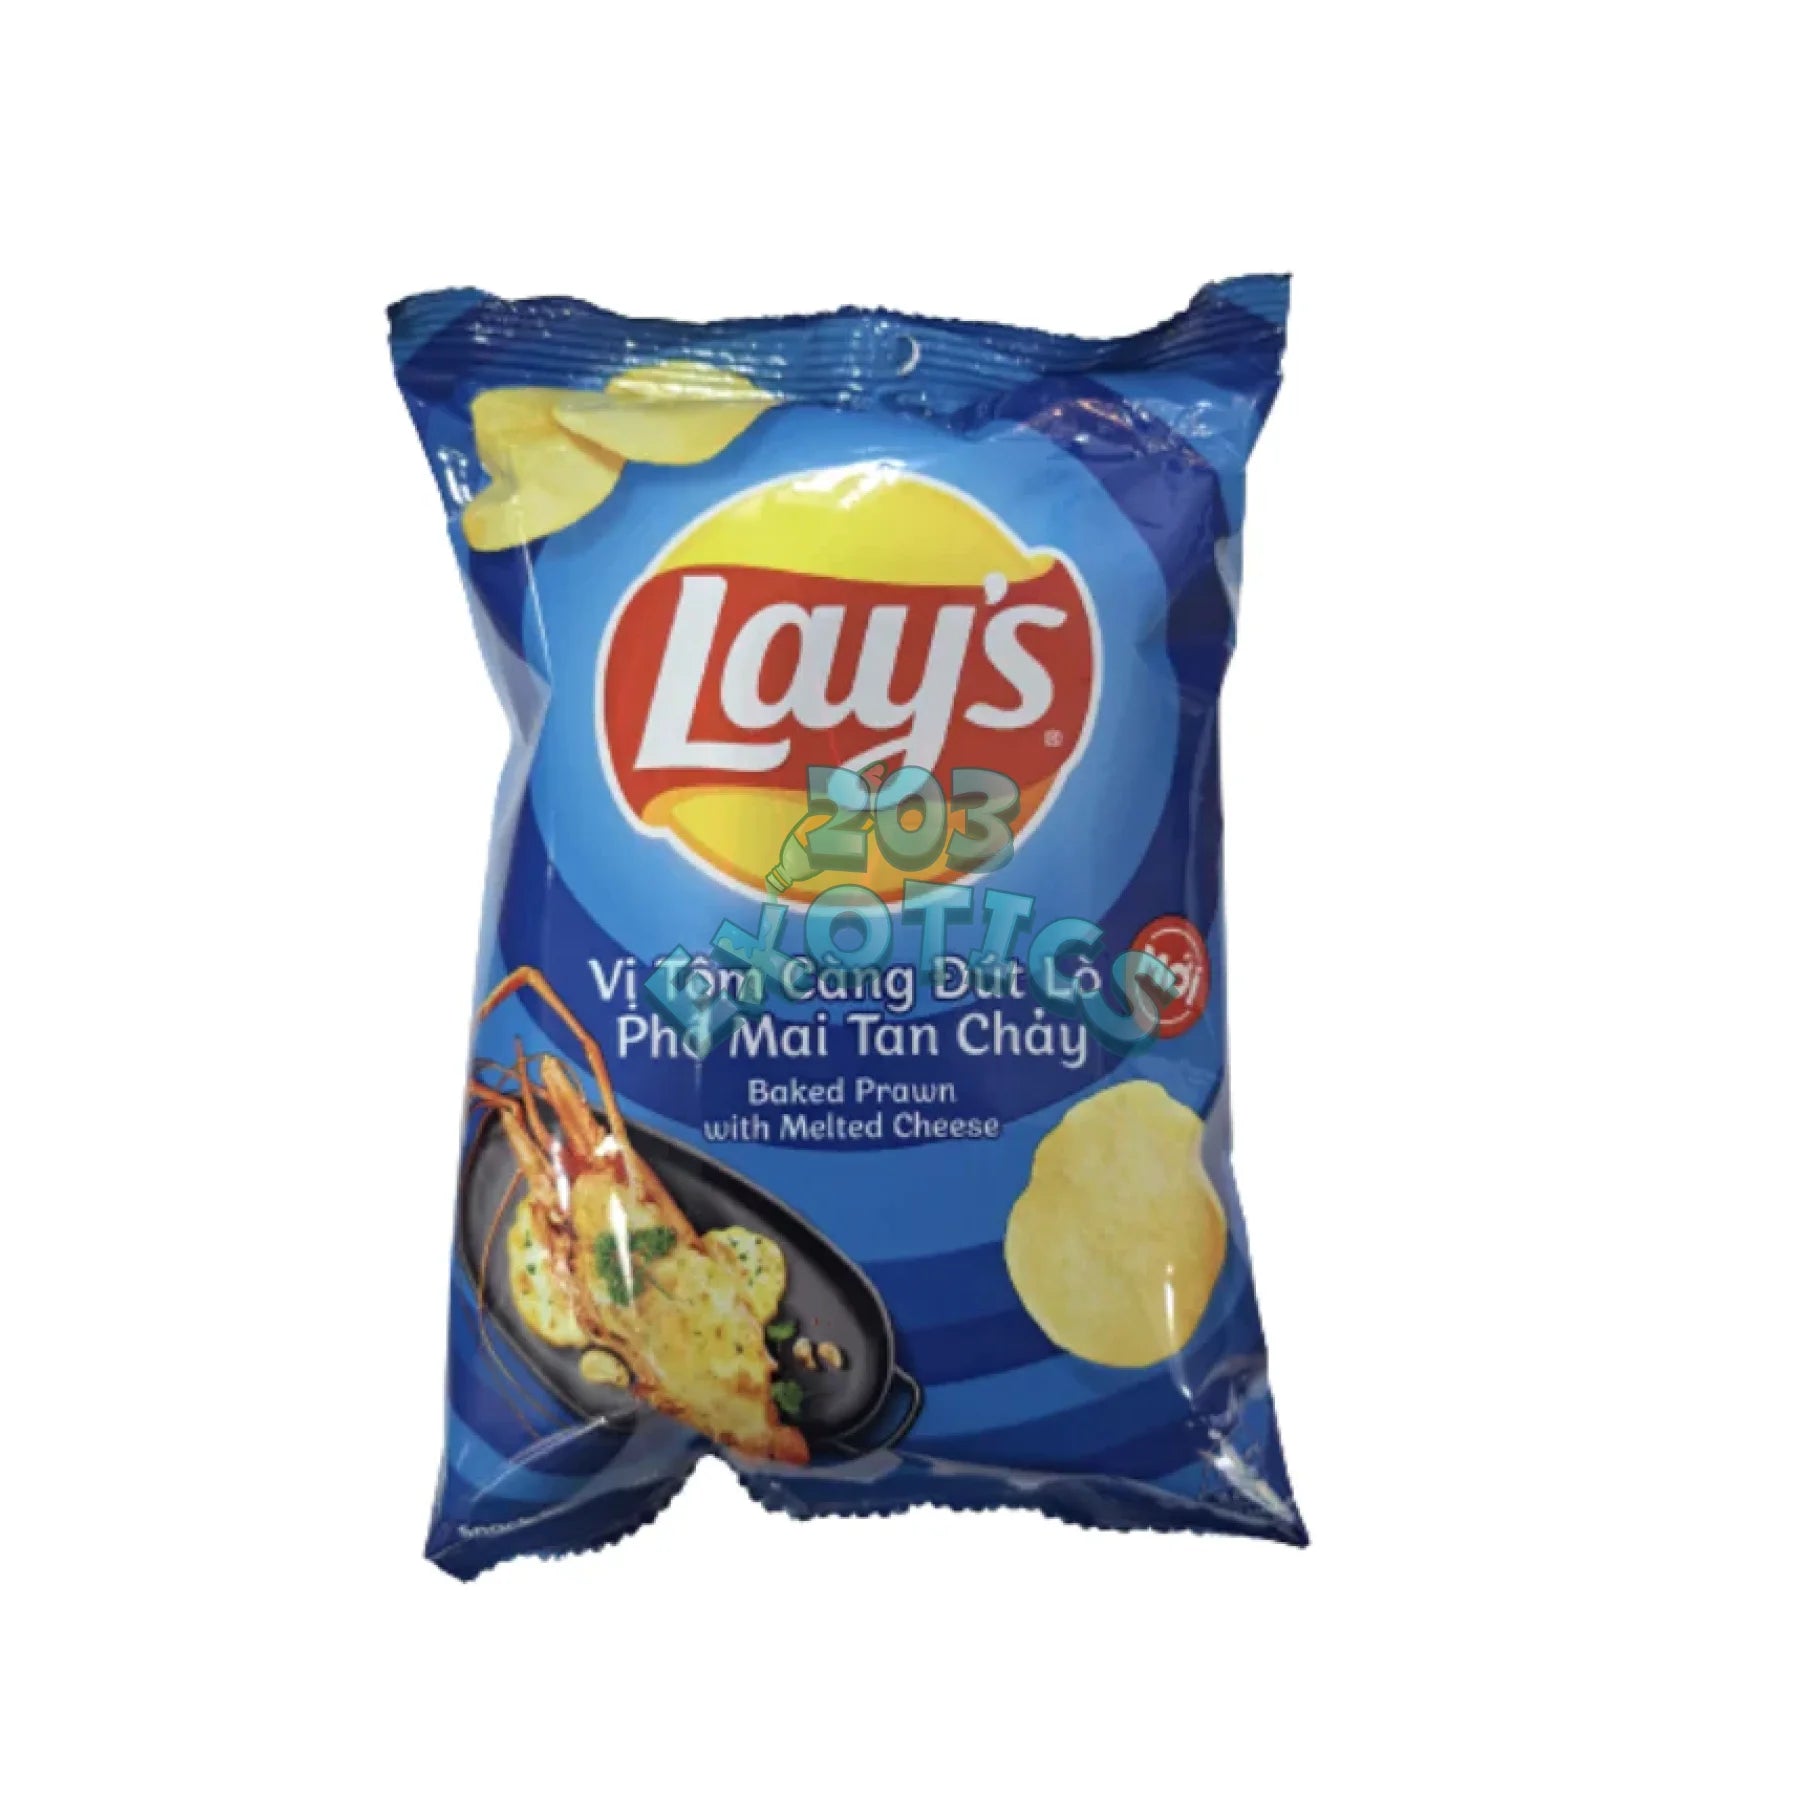 Lays Baked Prawn With Melted Cheese Flavored Chips (58G)